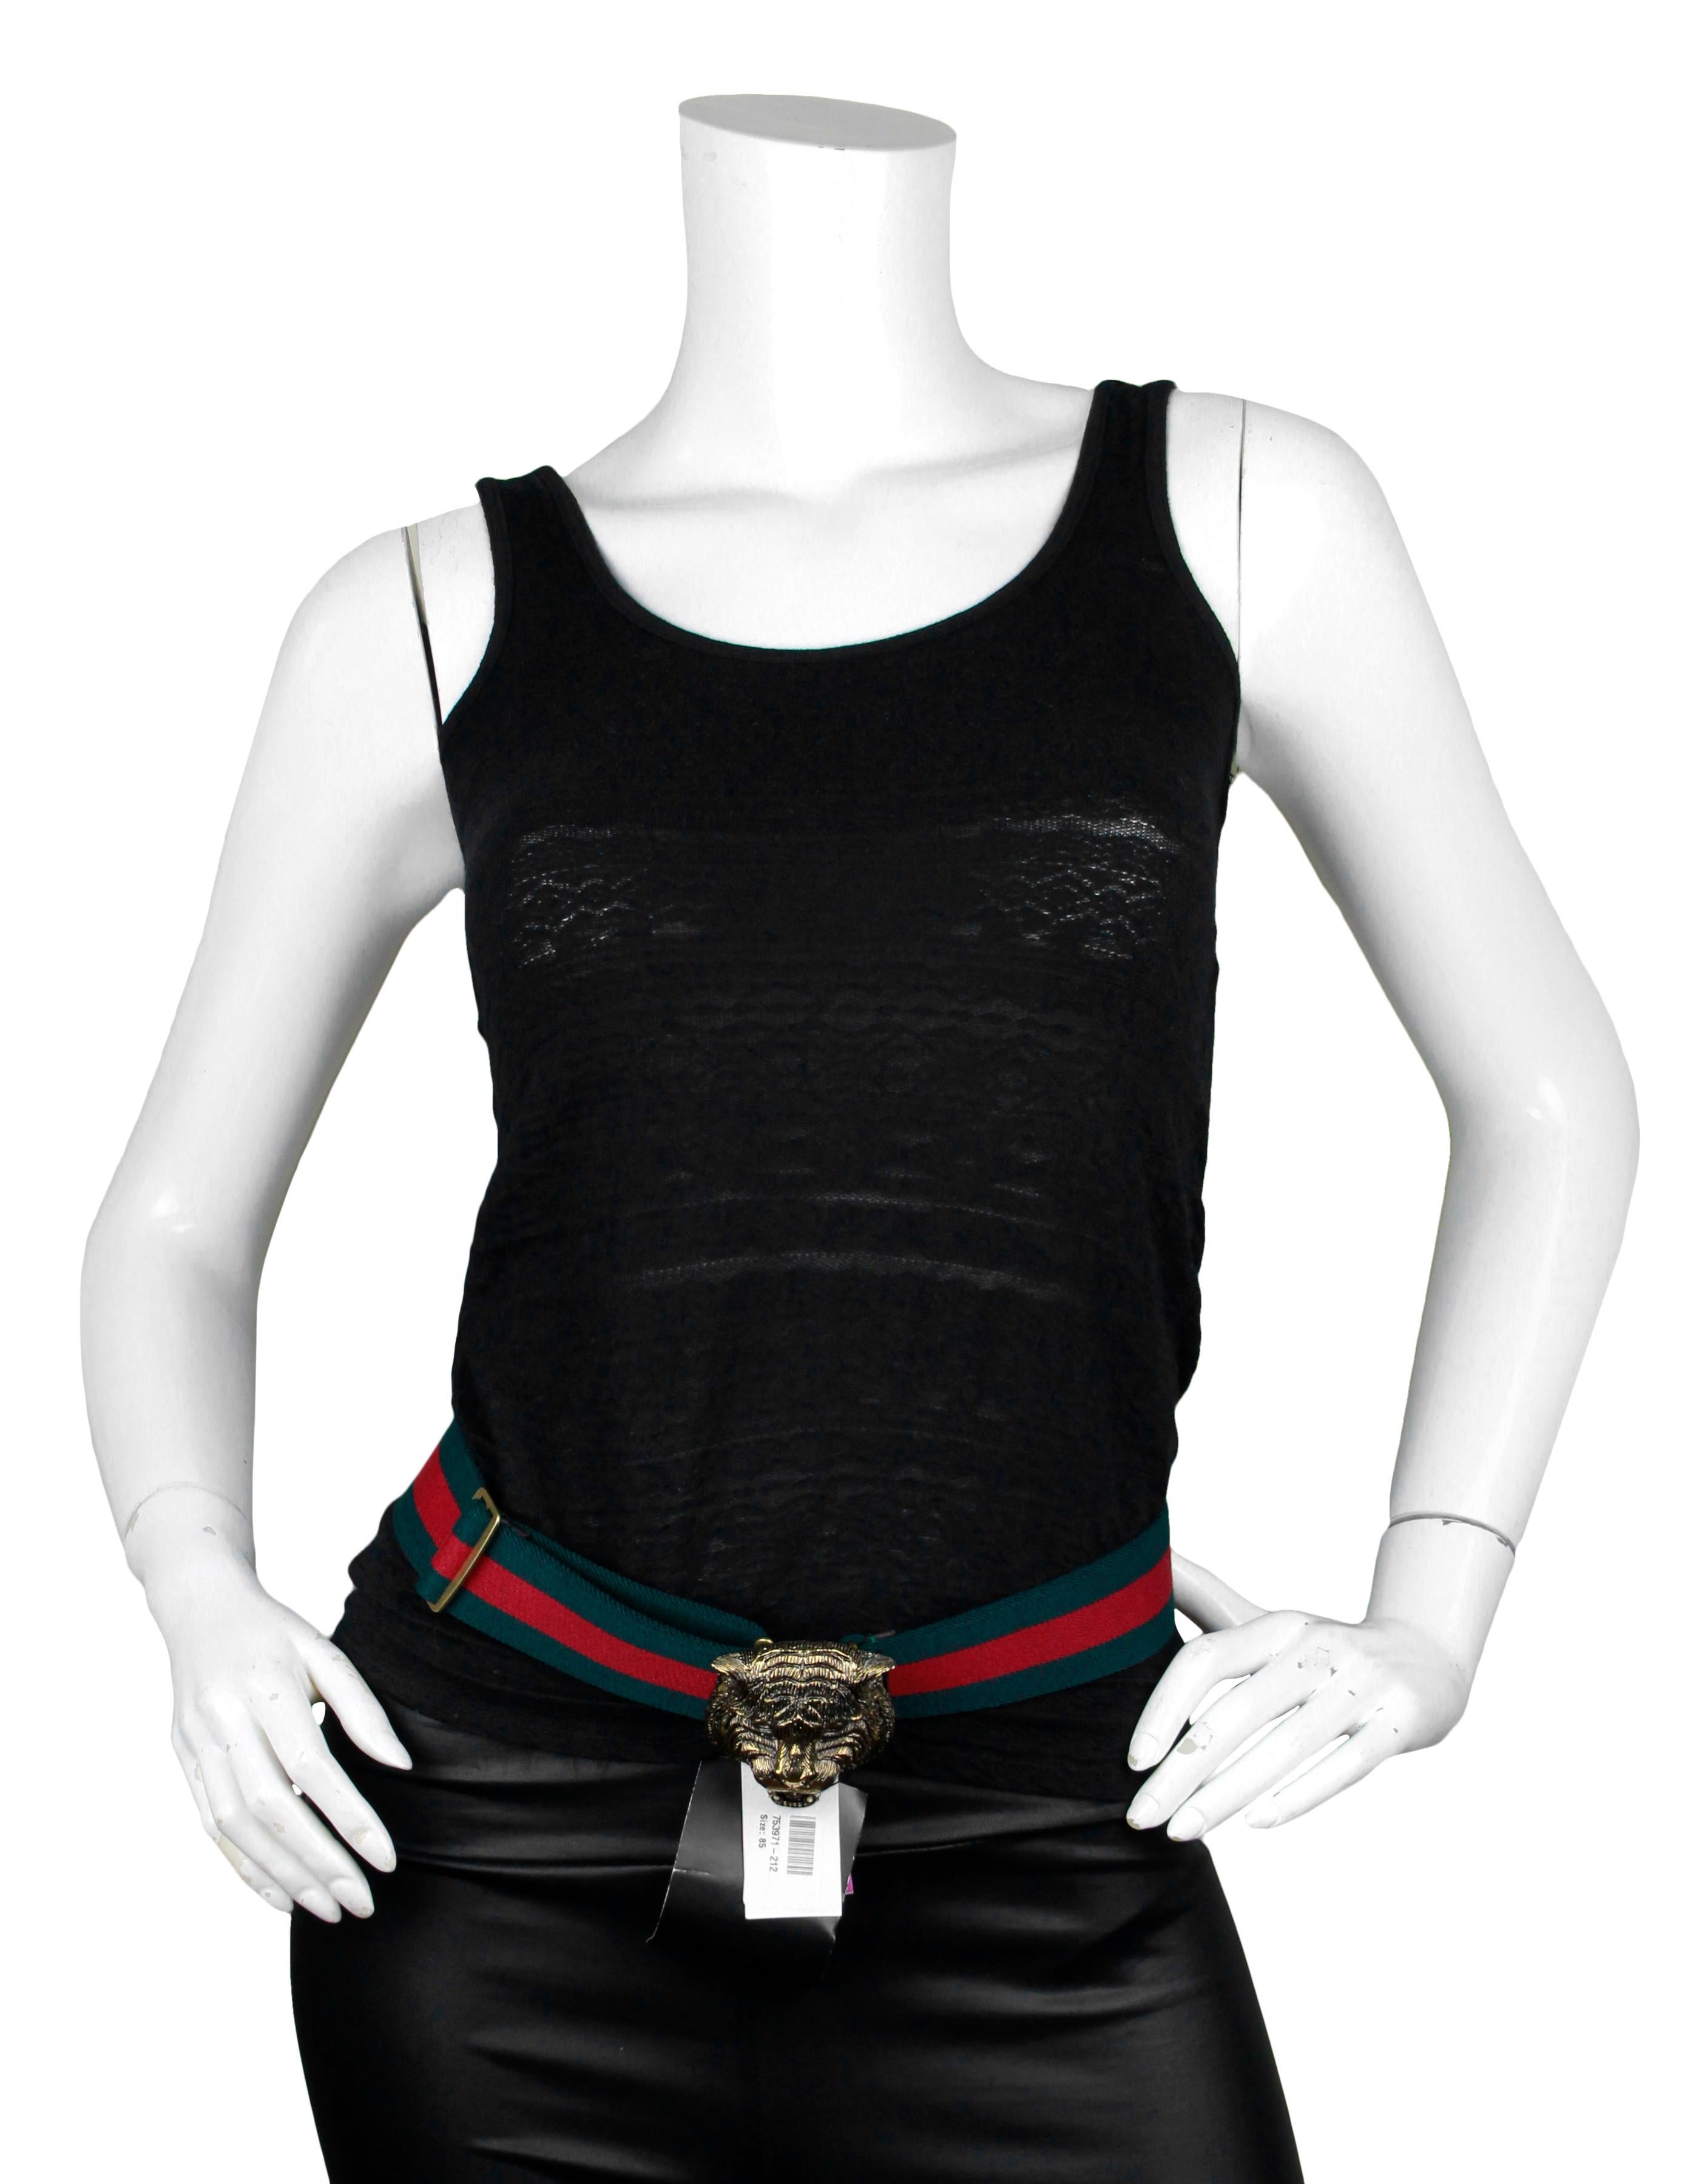 Gucci NWT Green/Red Web Tiger Head Buckle Belt sz 85

Made In: Italy
Color: Green and red
Hardware: Antique goldtone
Materials: Stretch canvas
Closure/Opening: Hook
Overall Condition: New with tags

Marked Size: 85cm/ 34